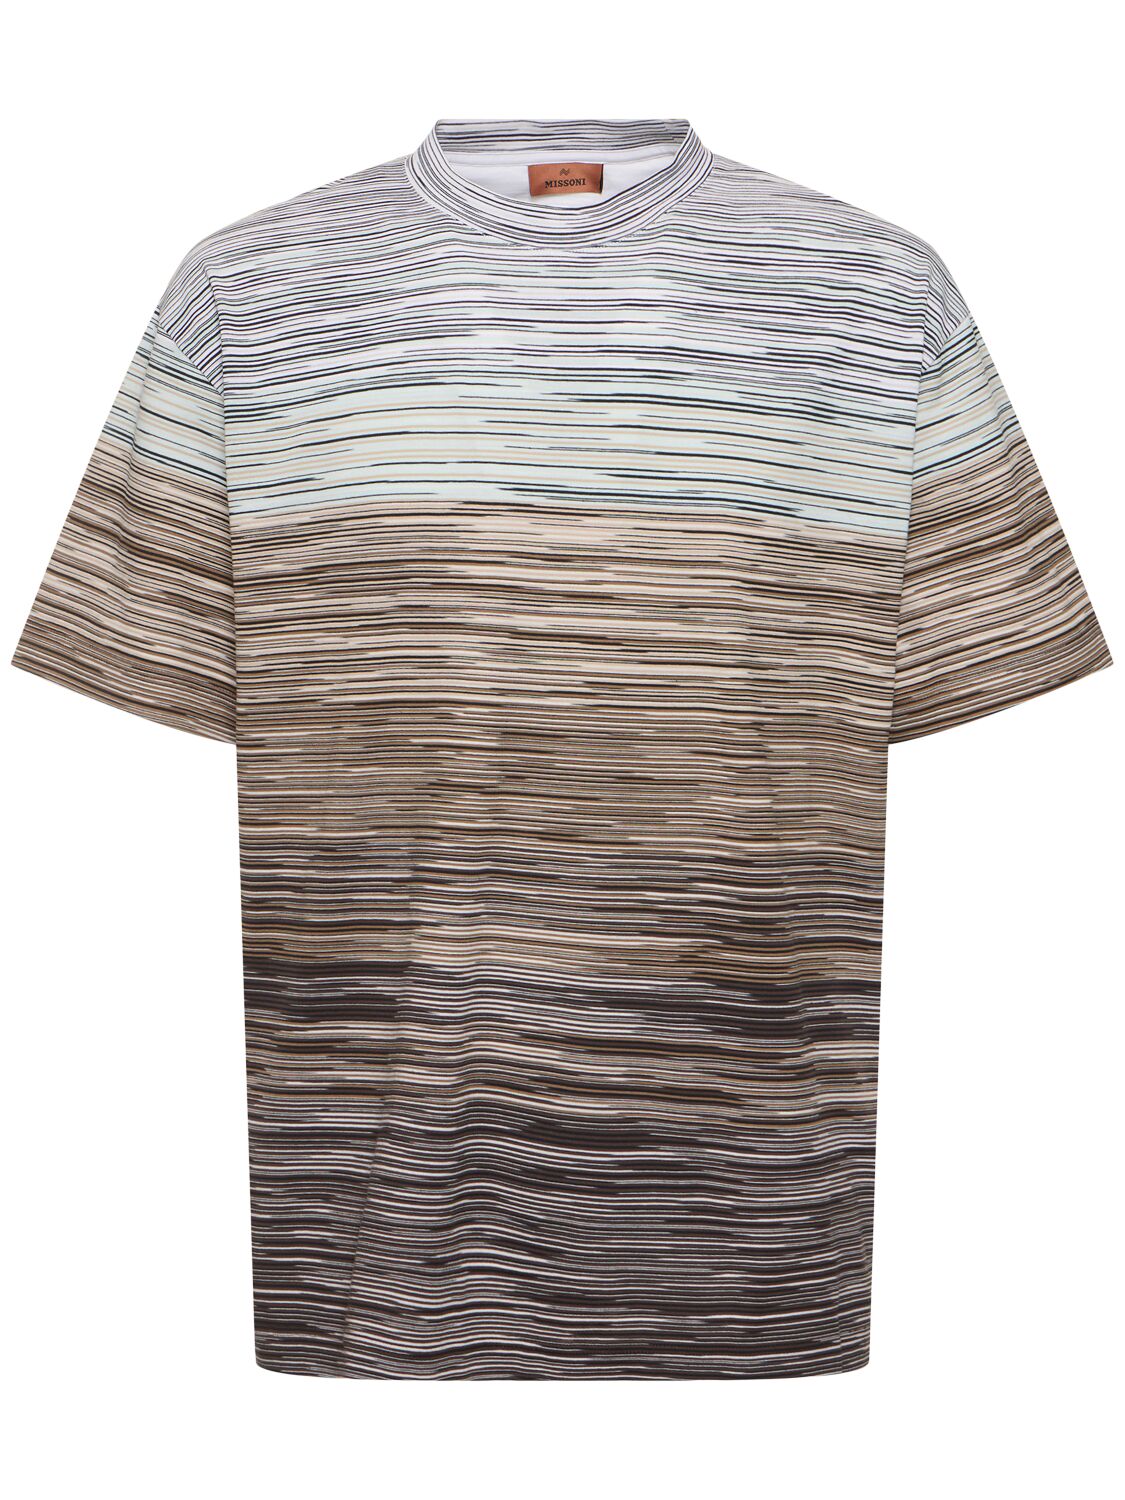 Image of Degrade Cotton Dyed T-shirt